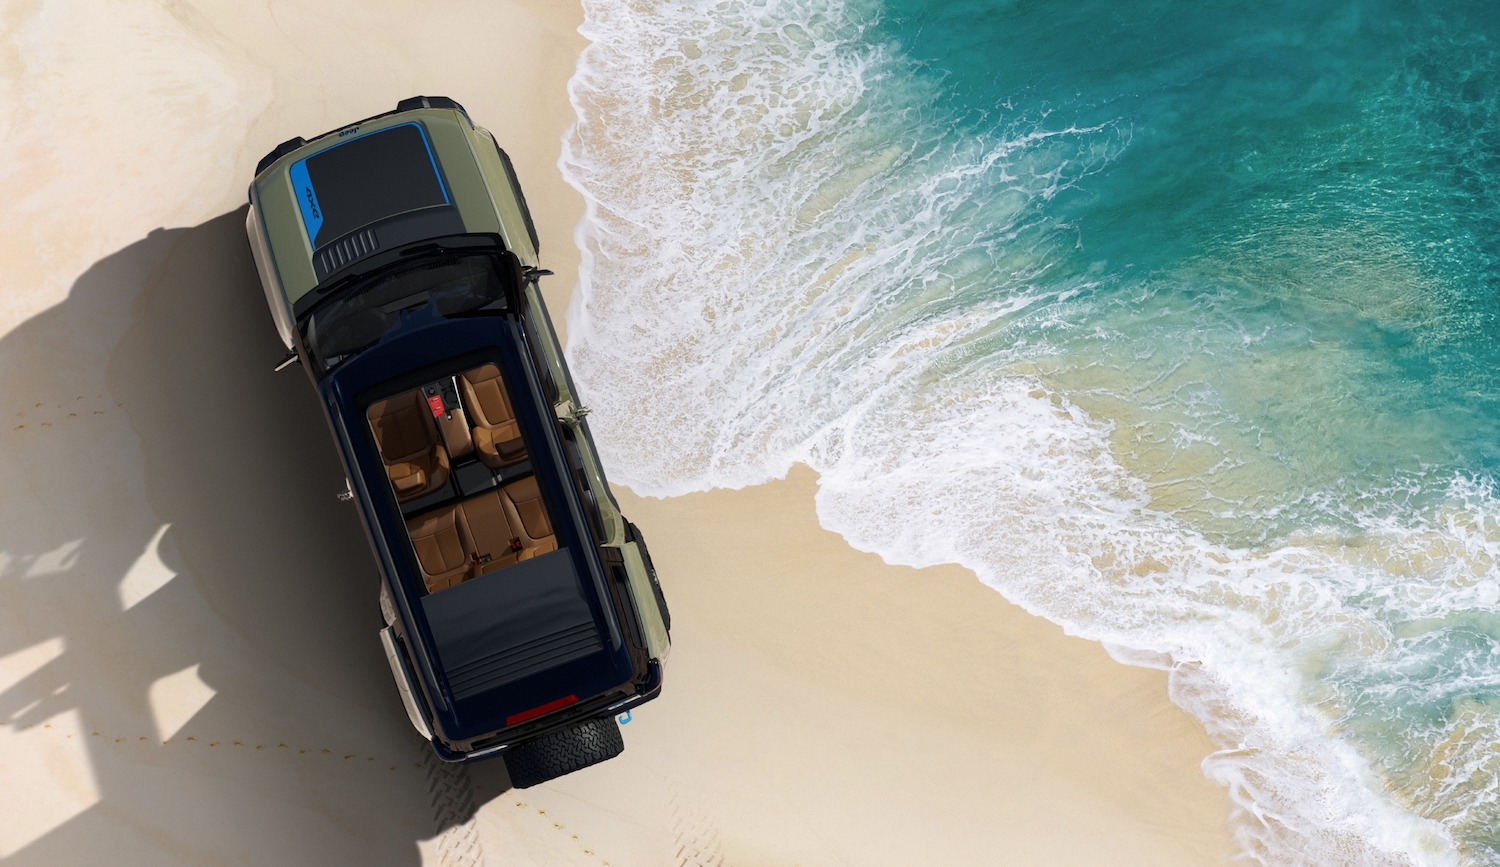 Birds-eye view of a Jeep Recon 4x4 SUV EV parked on a beach by the ocean.